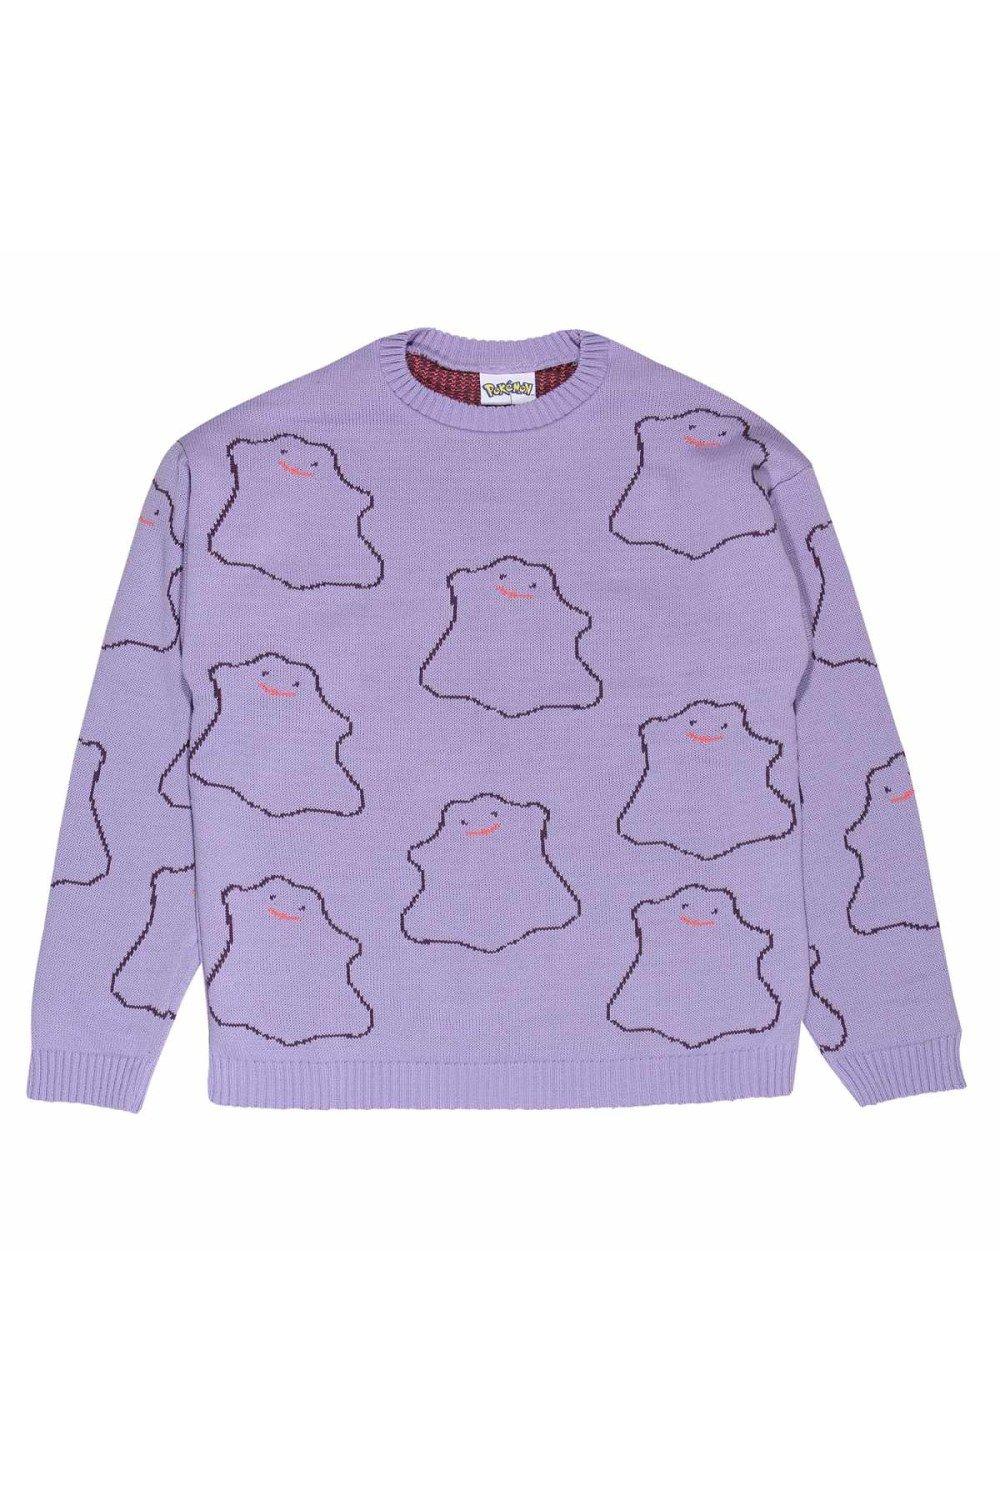 Ditto Knitted Sweatshirt